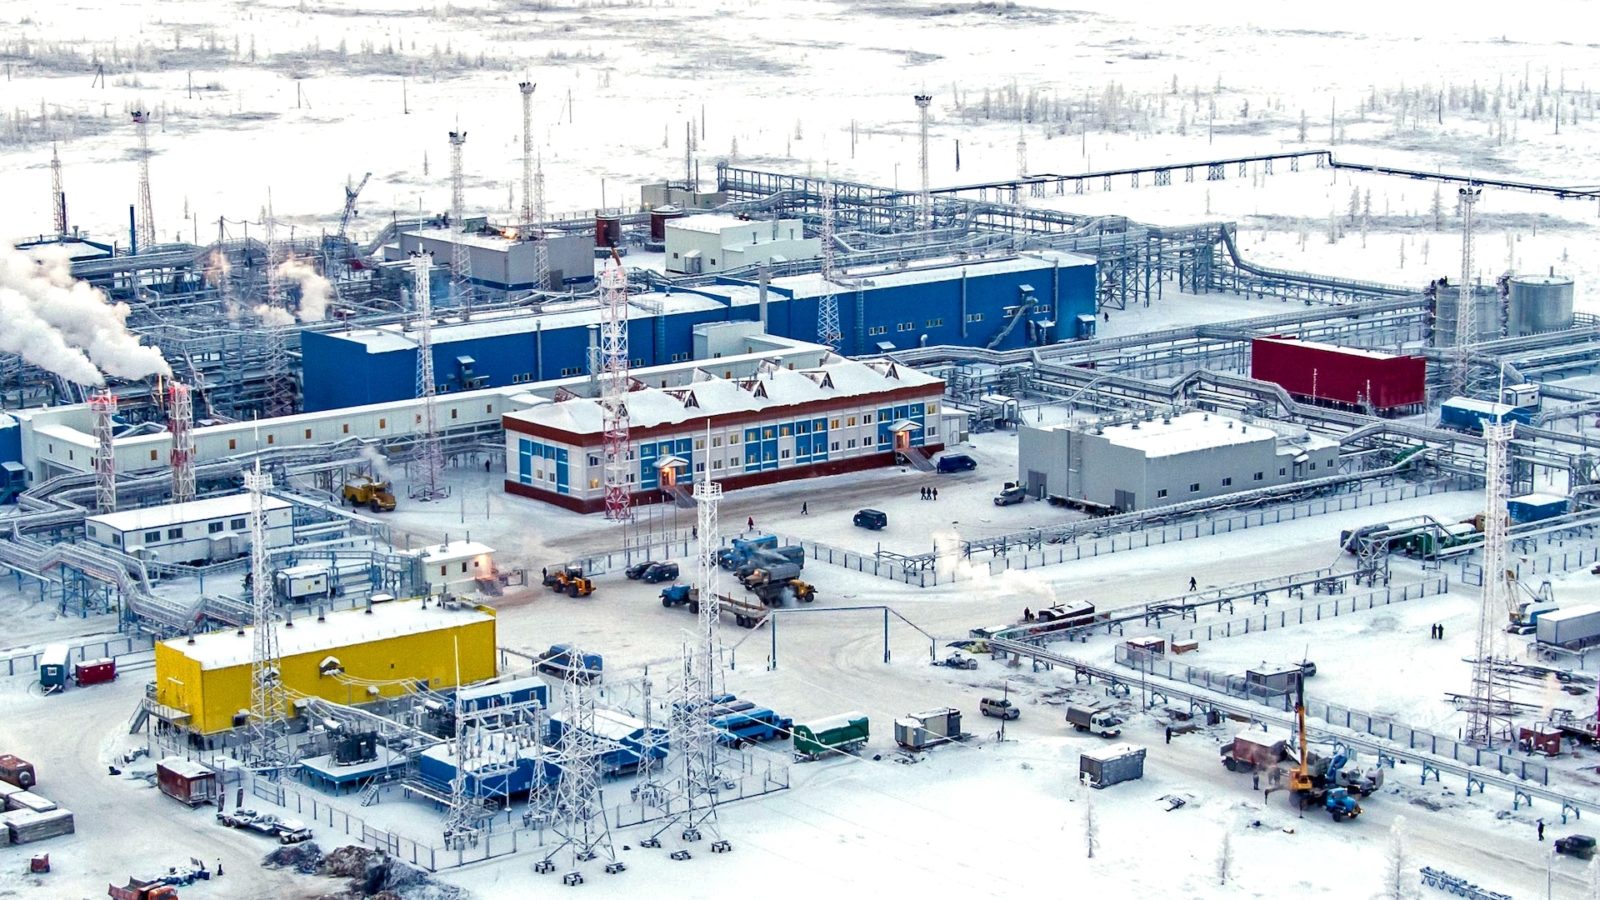 Industrial buildings on a snowy landscape with gas coming out of towers in the buildings.